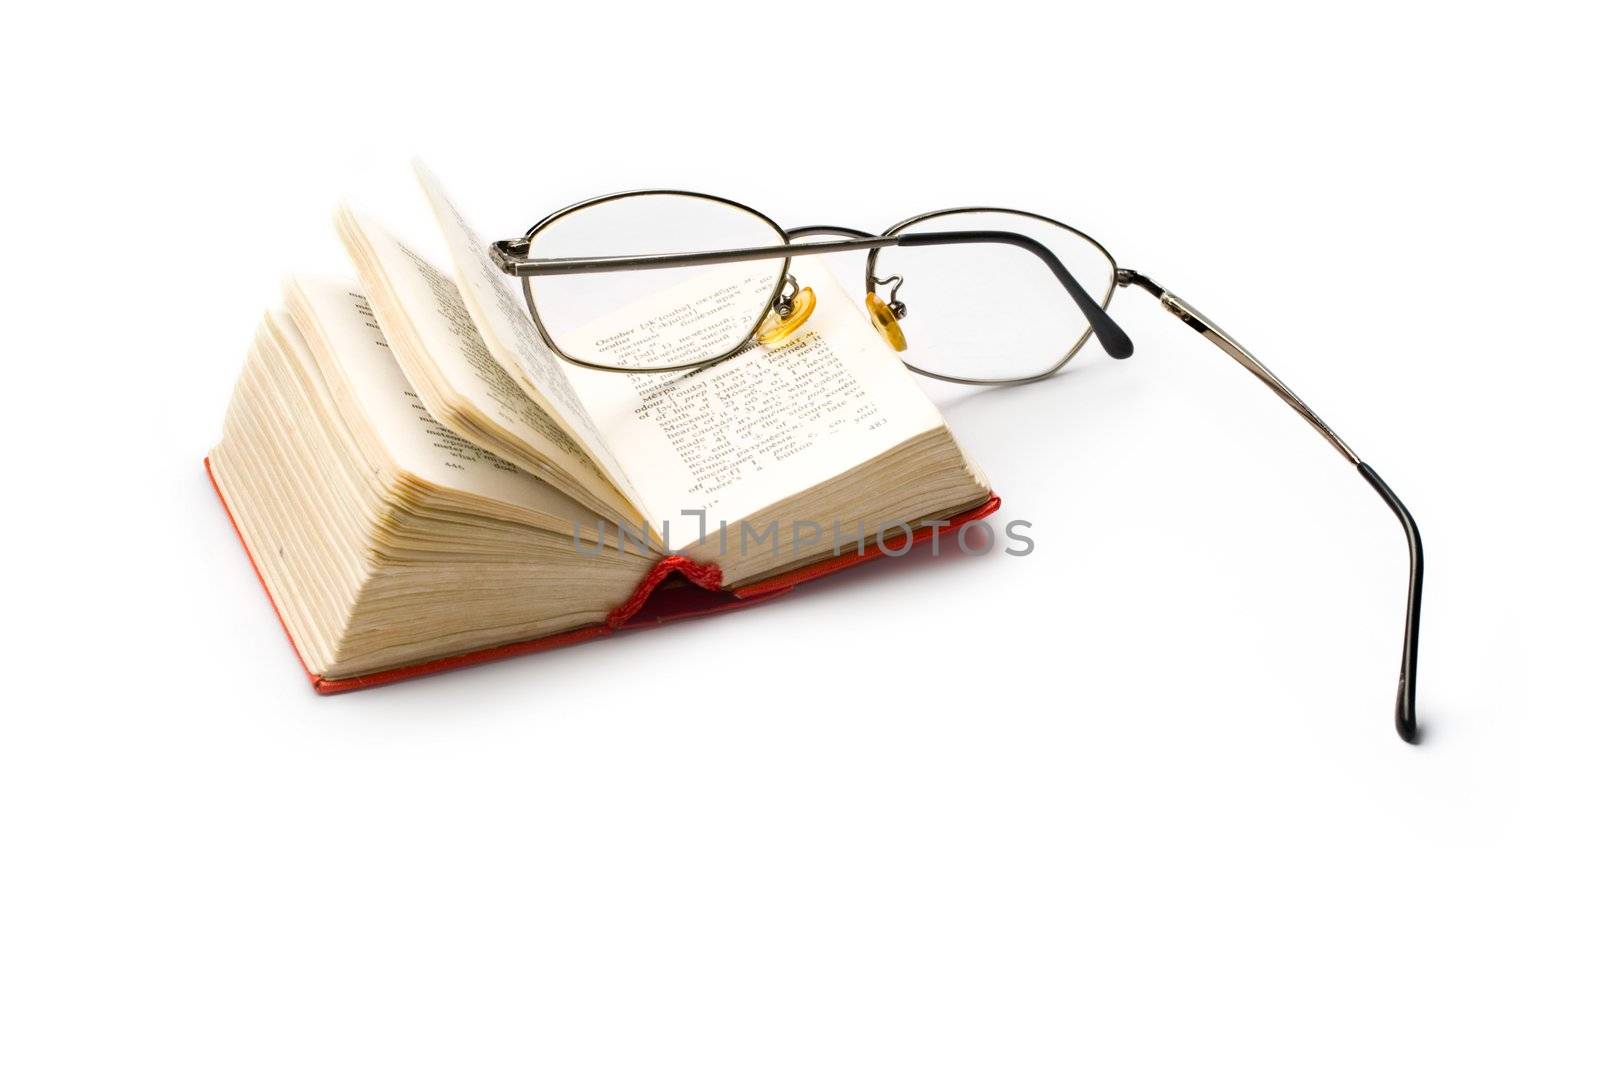 Book and glasses isolated on white by Garsya